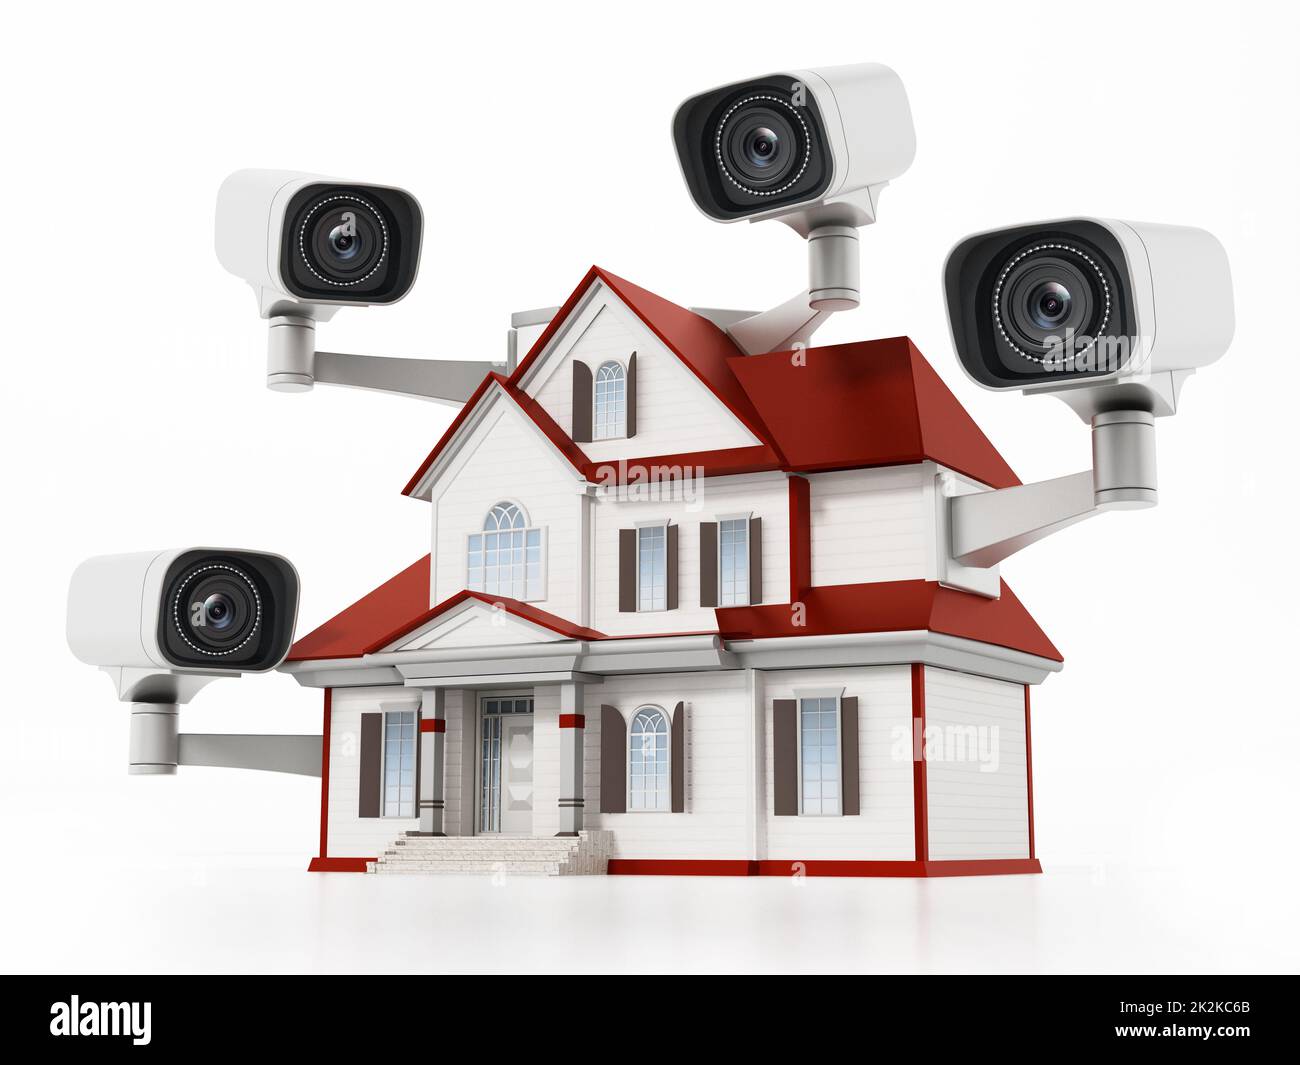 House protected with CCTV surveillance cameras. 3D illustration Stock Photo